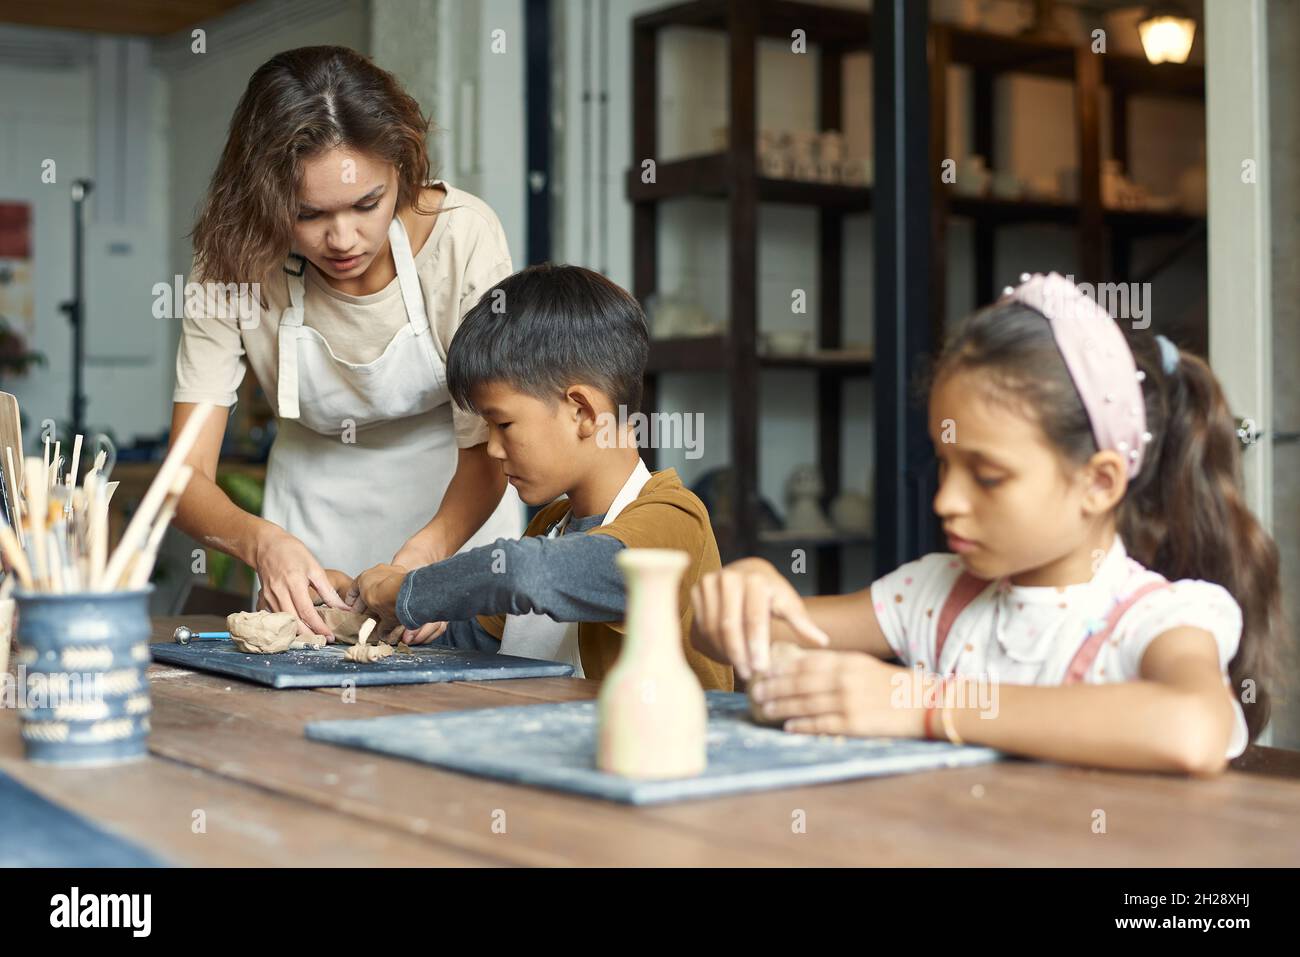 Young teacher in apron standing at Asian boy and helping him to sculpt clay at ceramics class Stock Photo